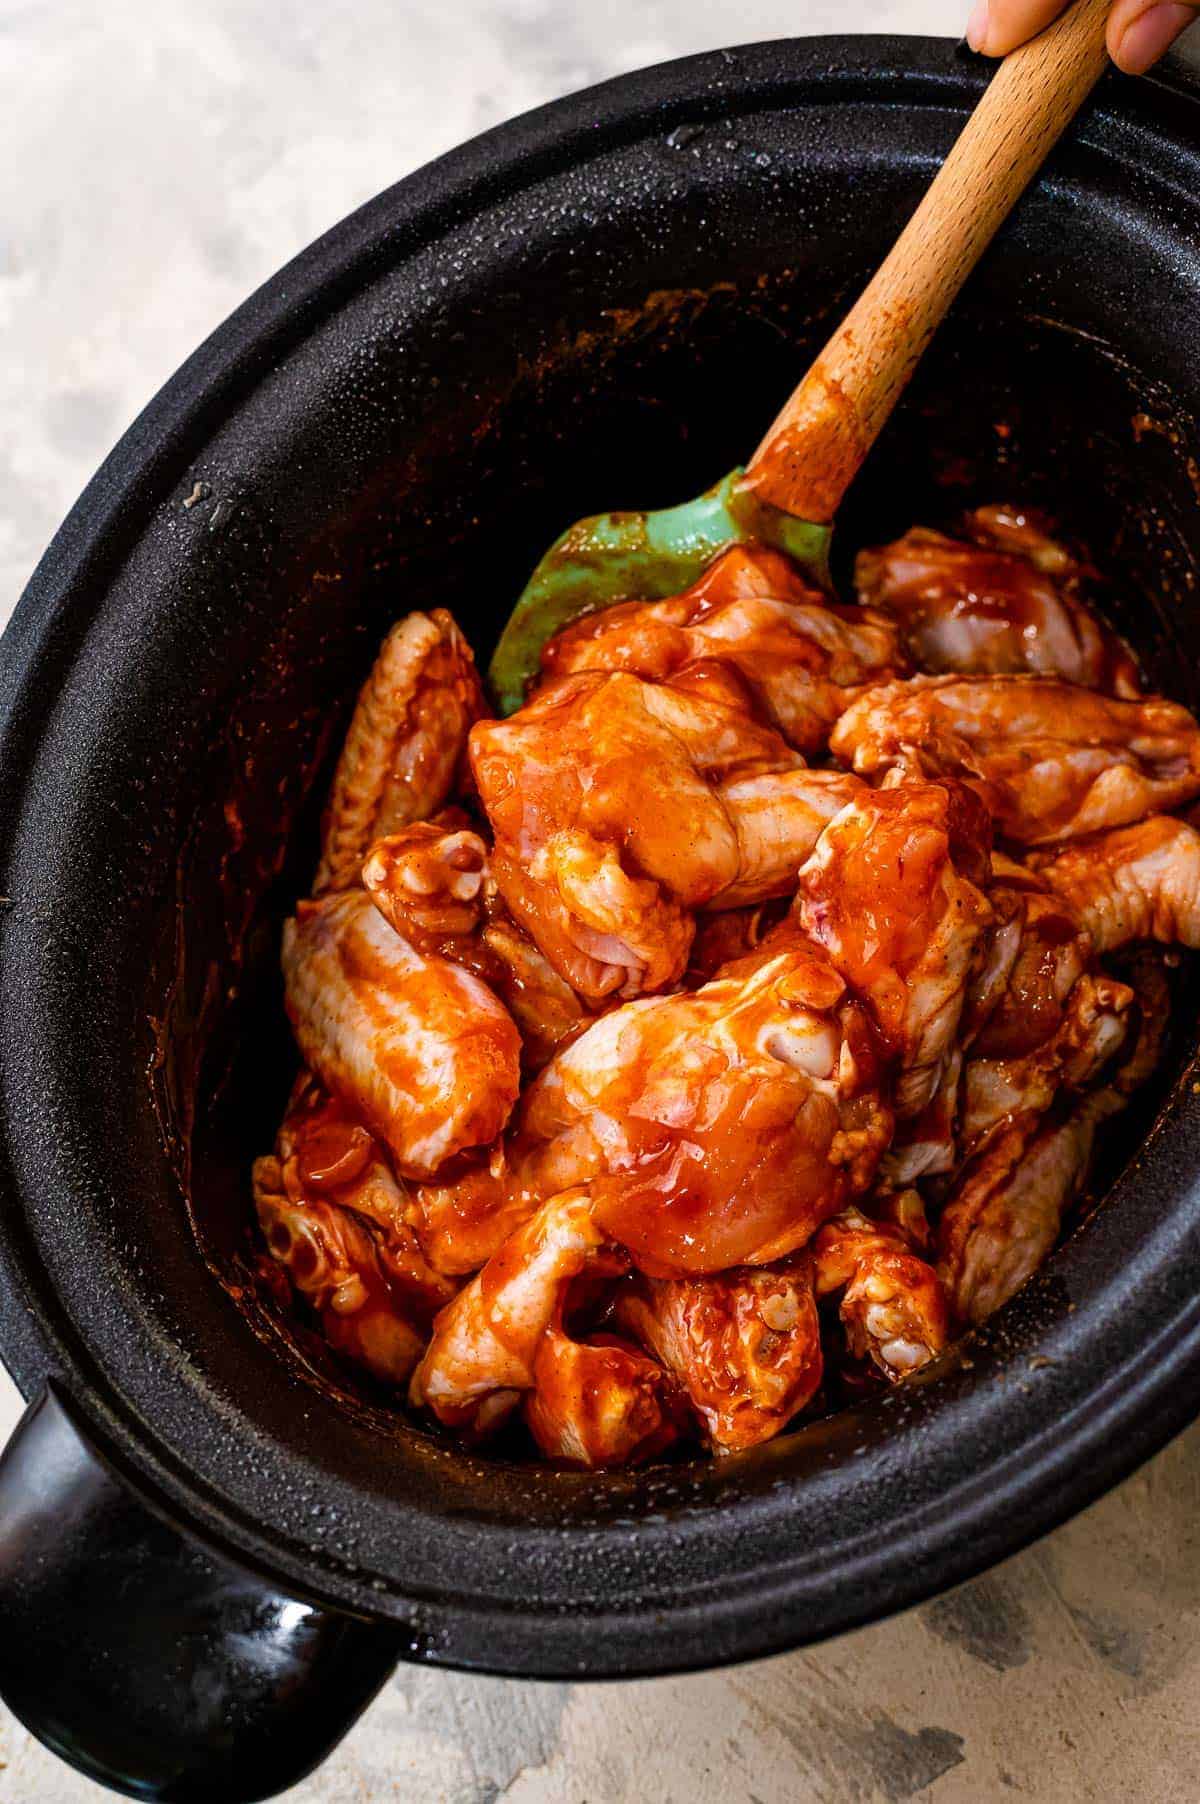 Stirring chicken wings and bbq sauce in crock pot